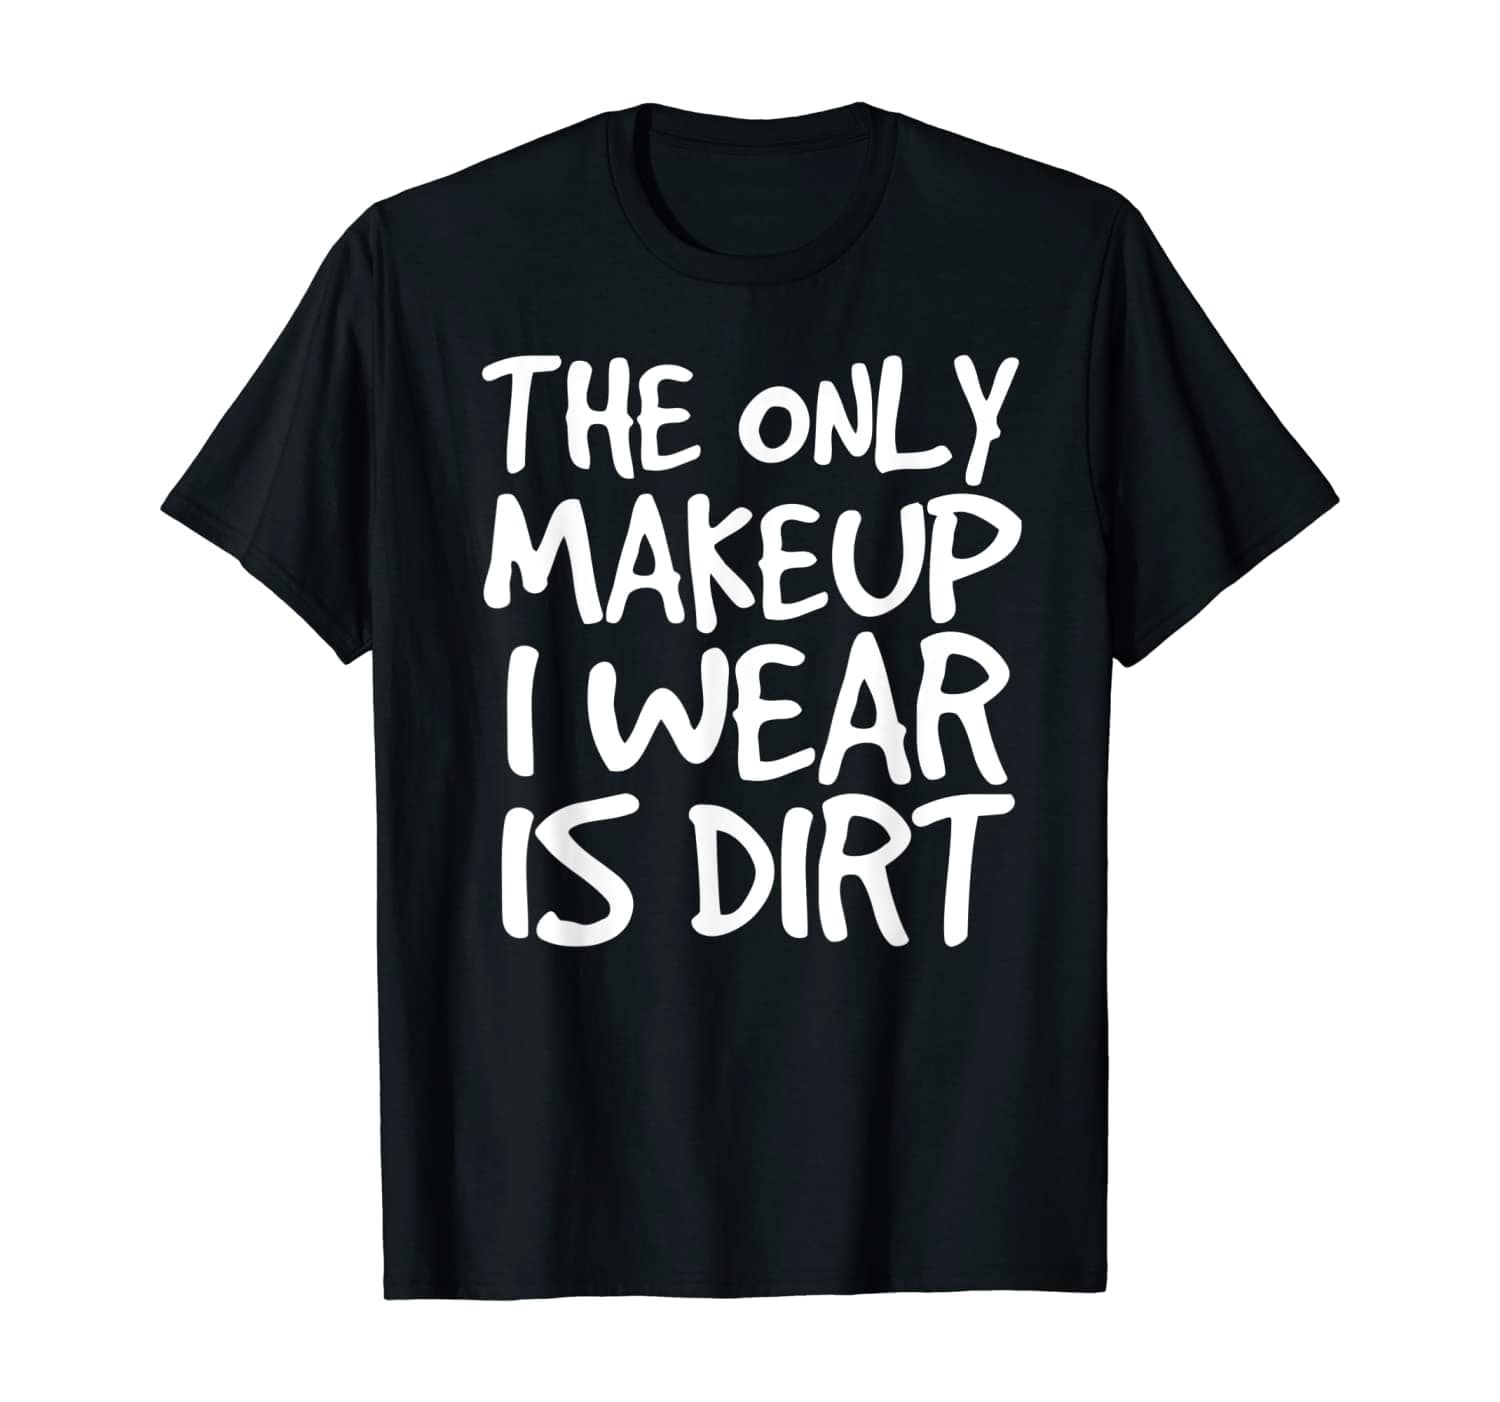 The Only Makeup I Wear Is Dirt Funny Soccer T-Shirt